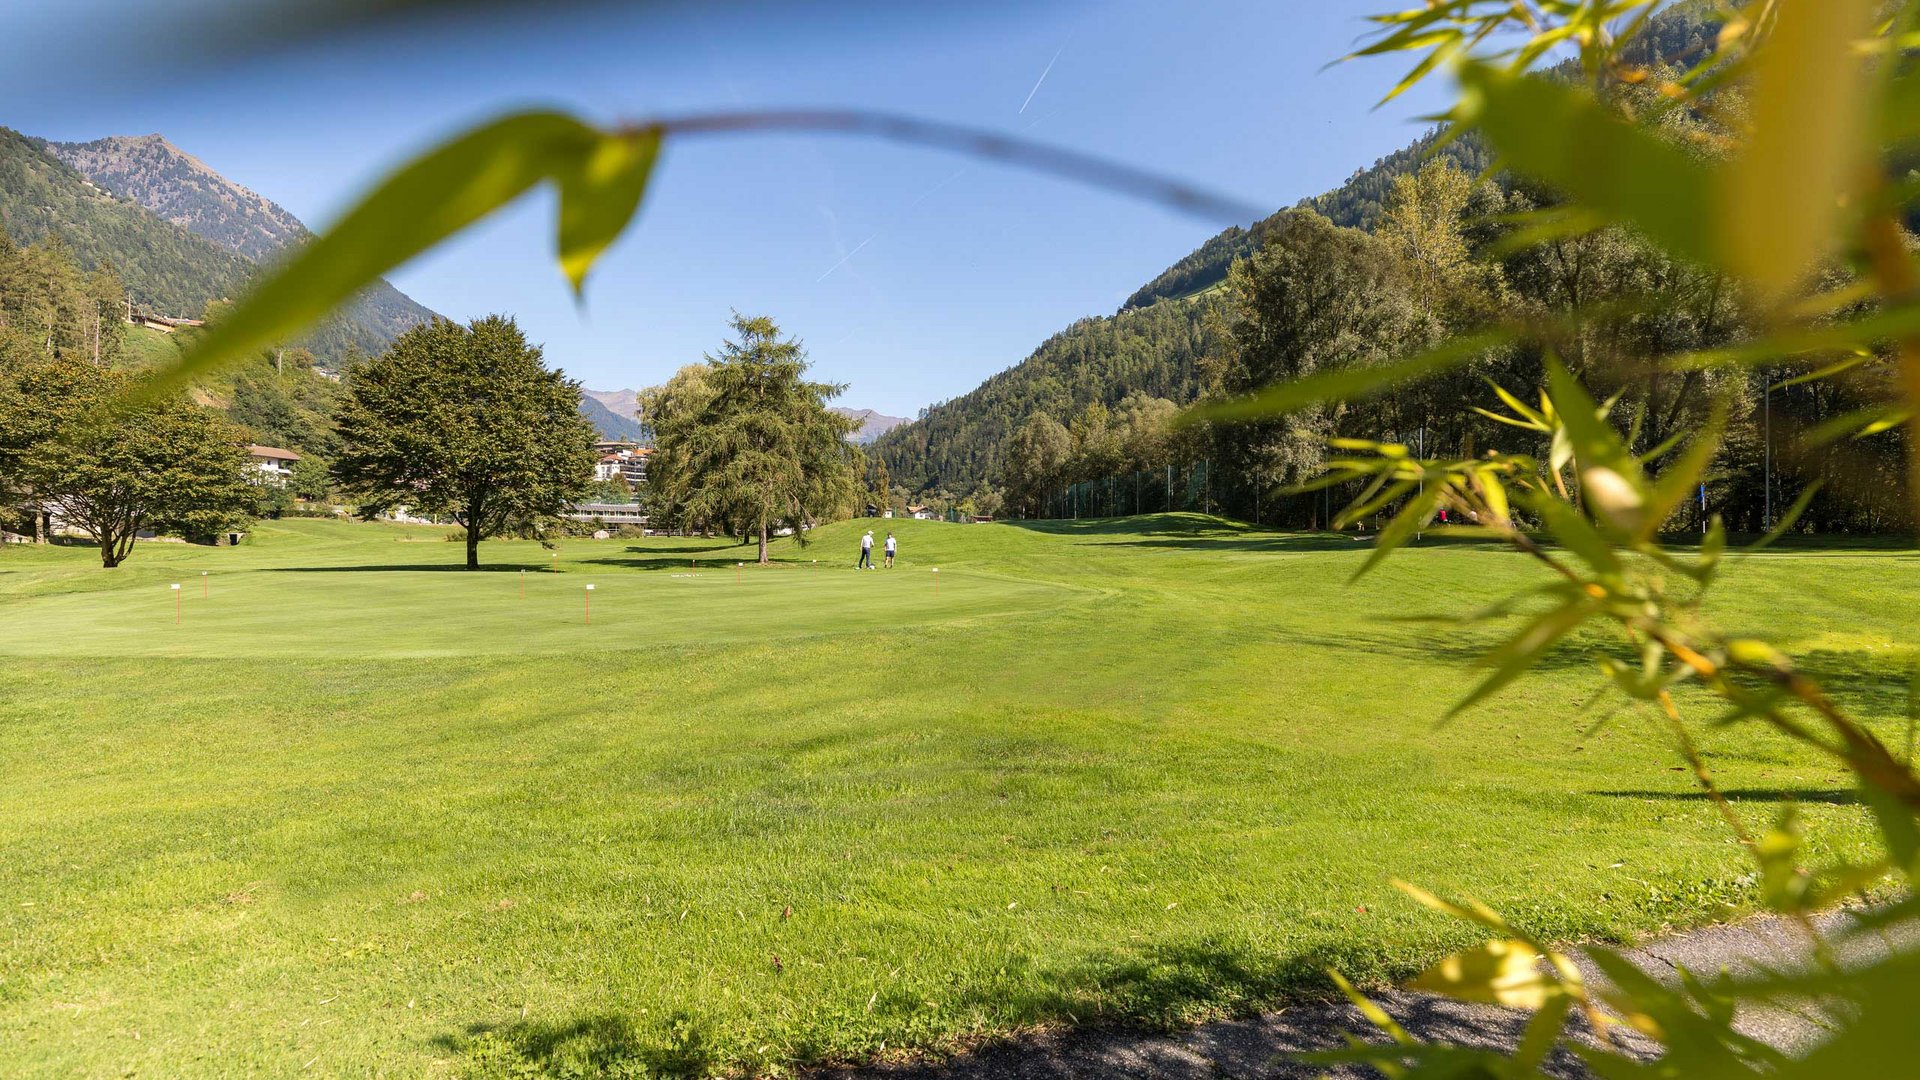 Exciting games at the golf hotel in South Tyrol